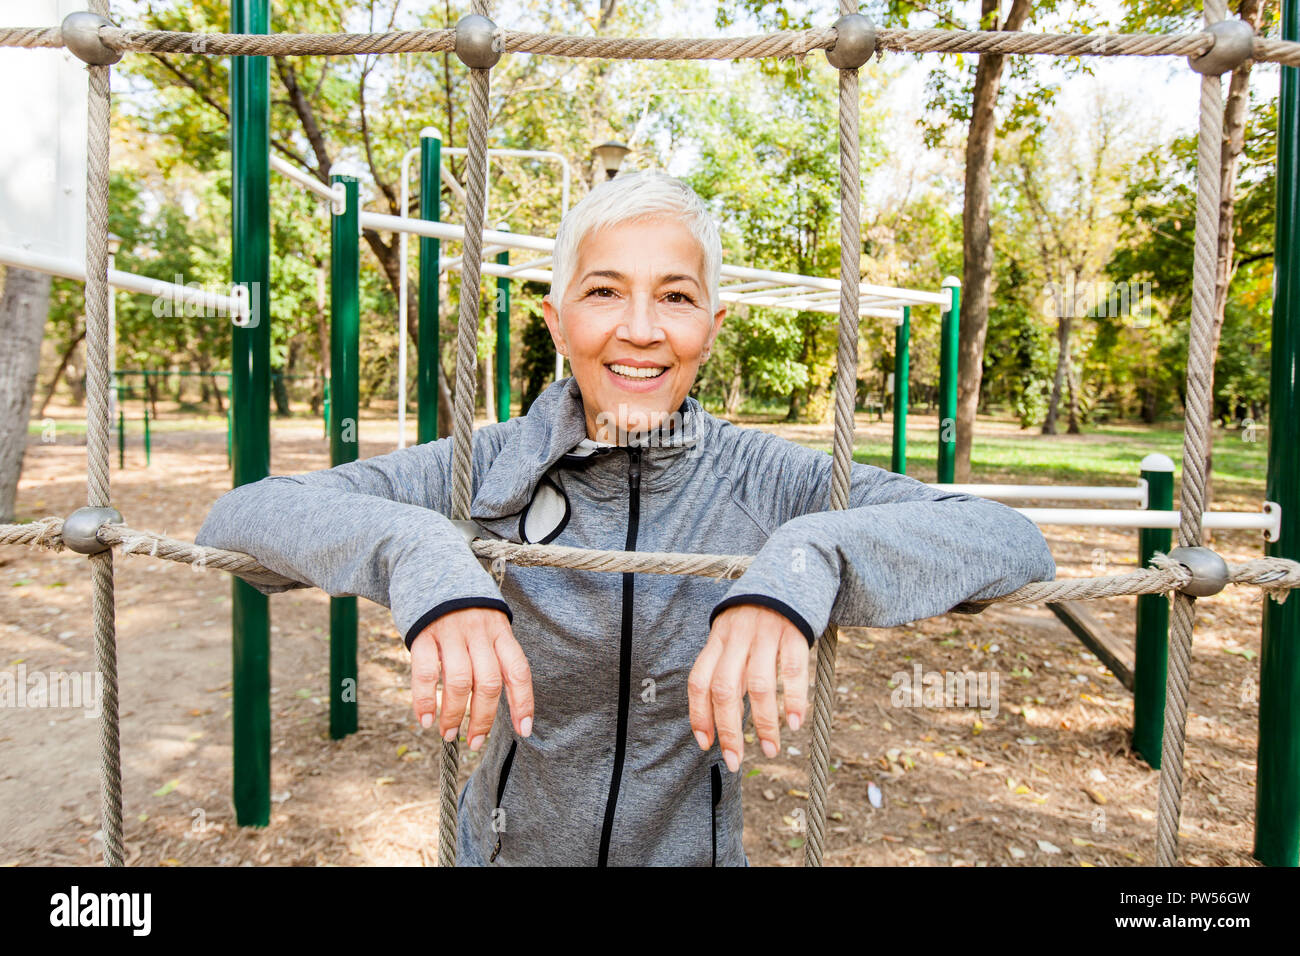 Portrait Of Healthy Happy Senior Woman At Outdoor Gym. Stock Photo